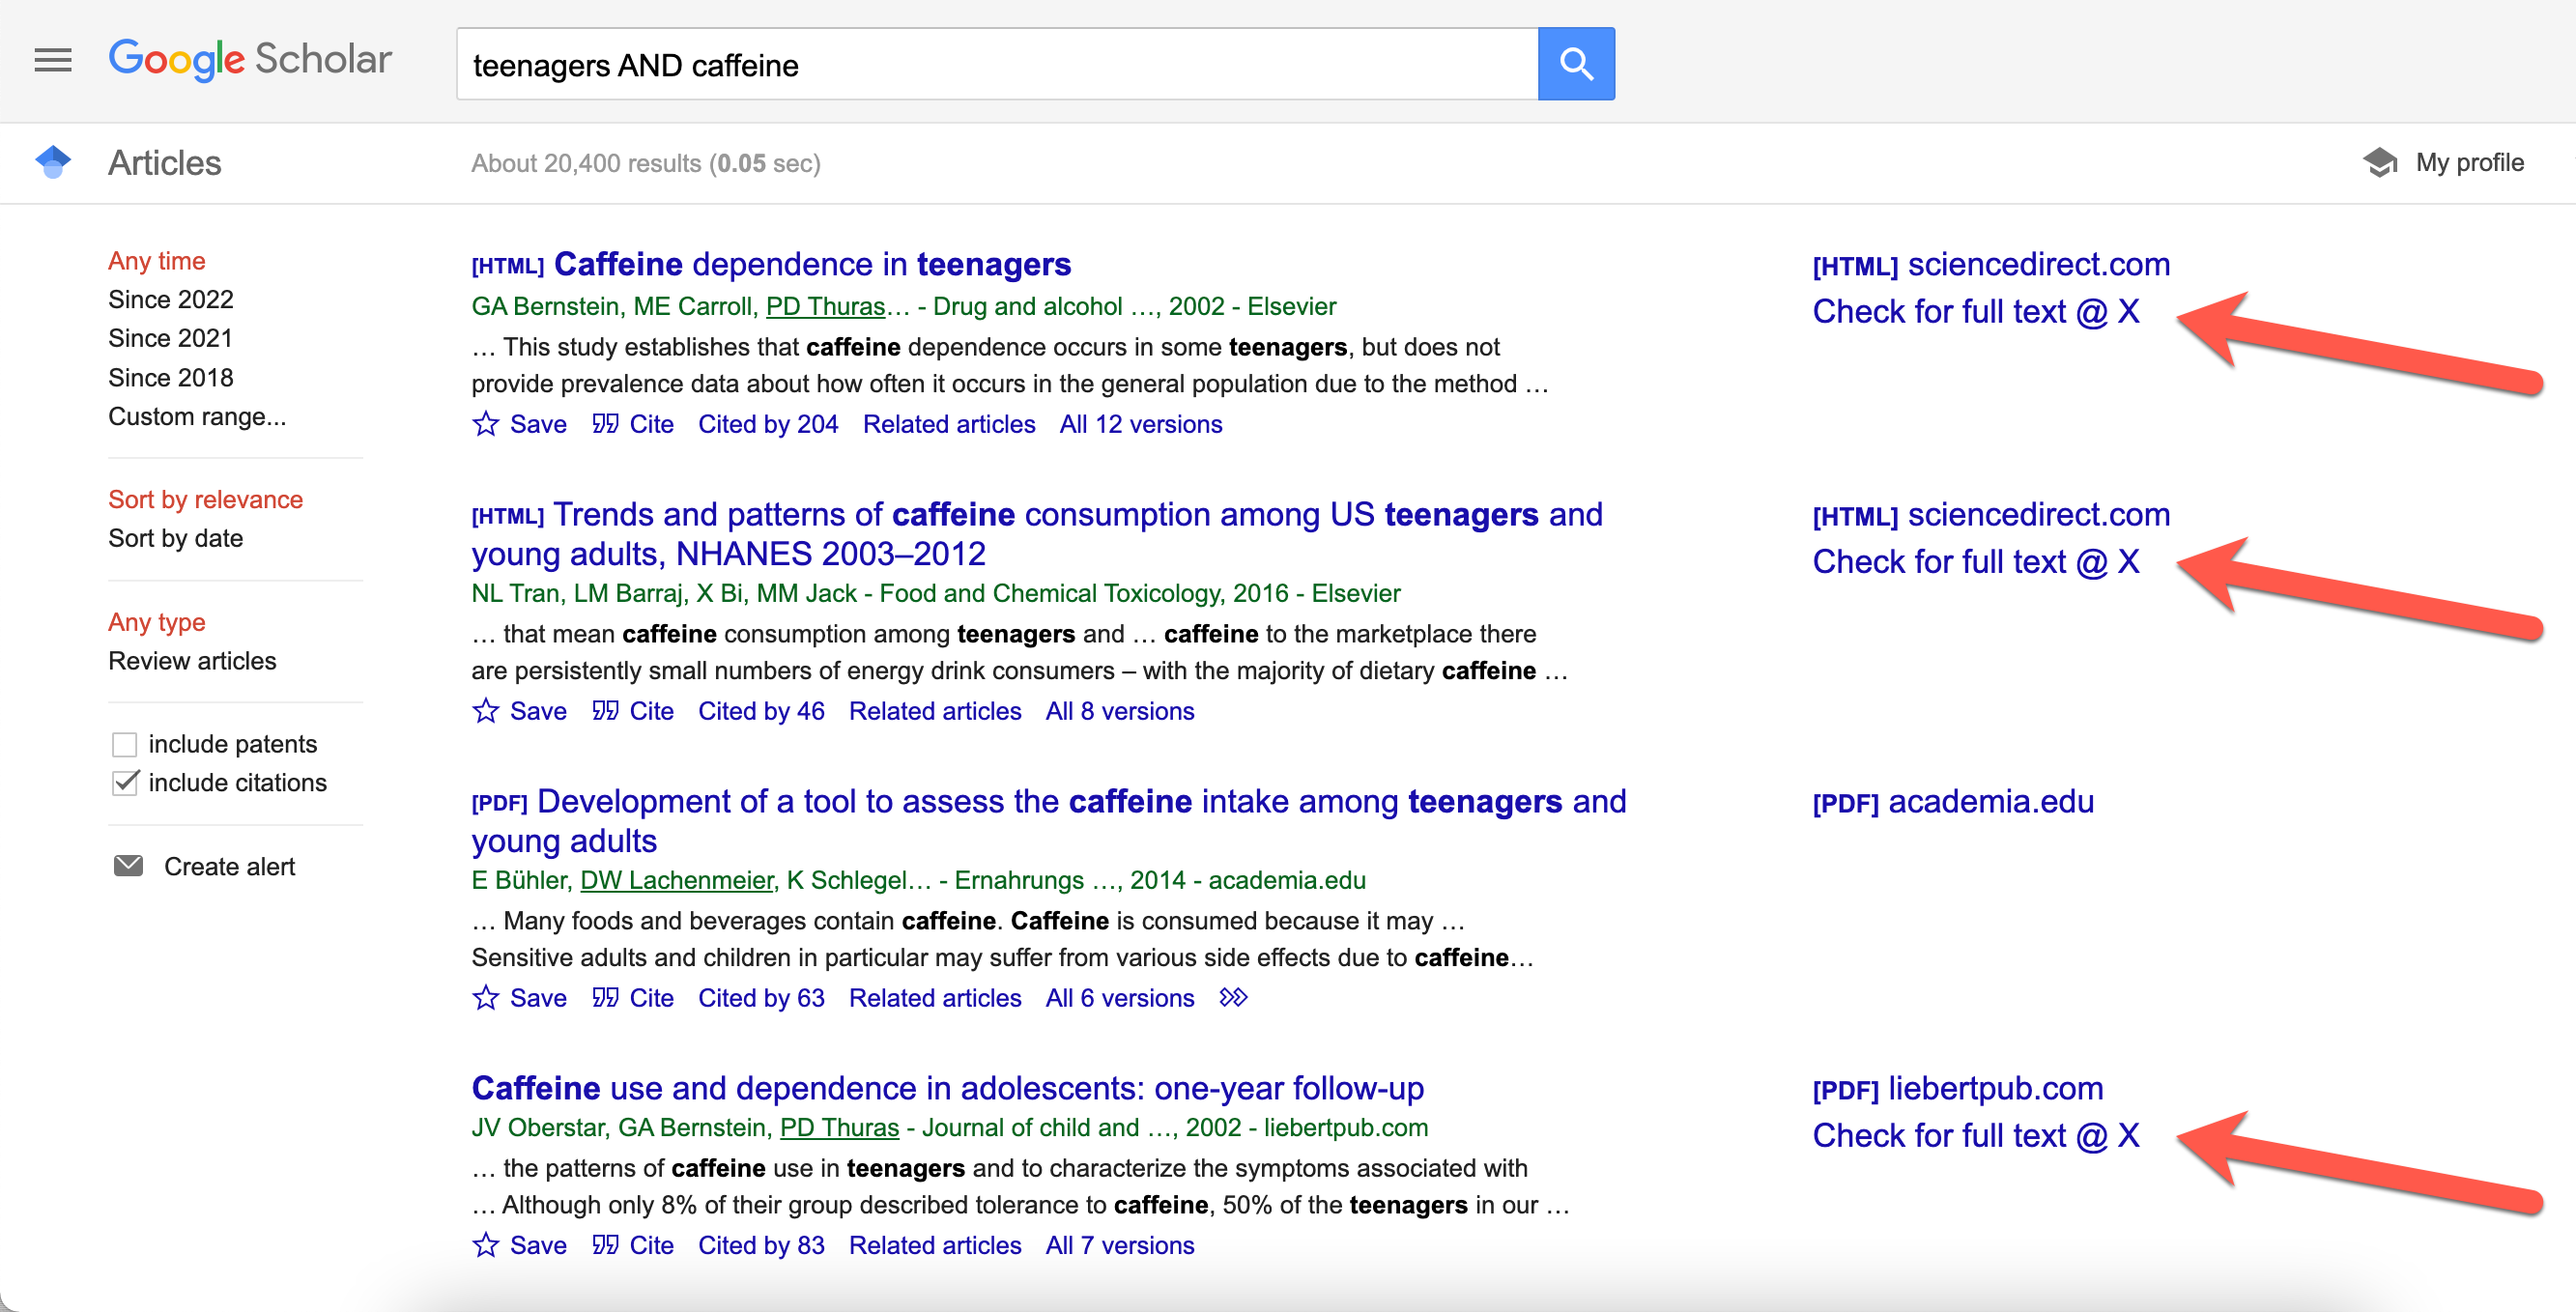 Screenshot of Google Scholar Search Results highlighting the "Check for full text @ X" link